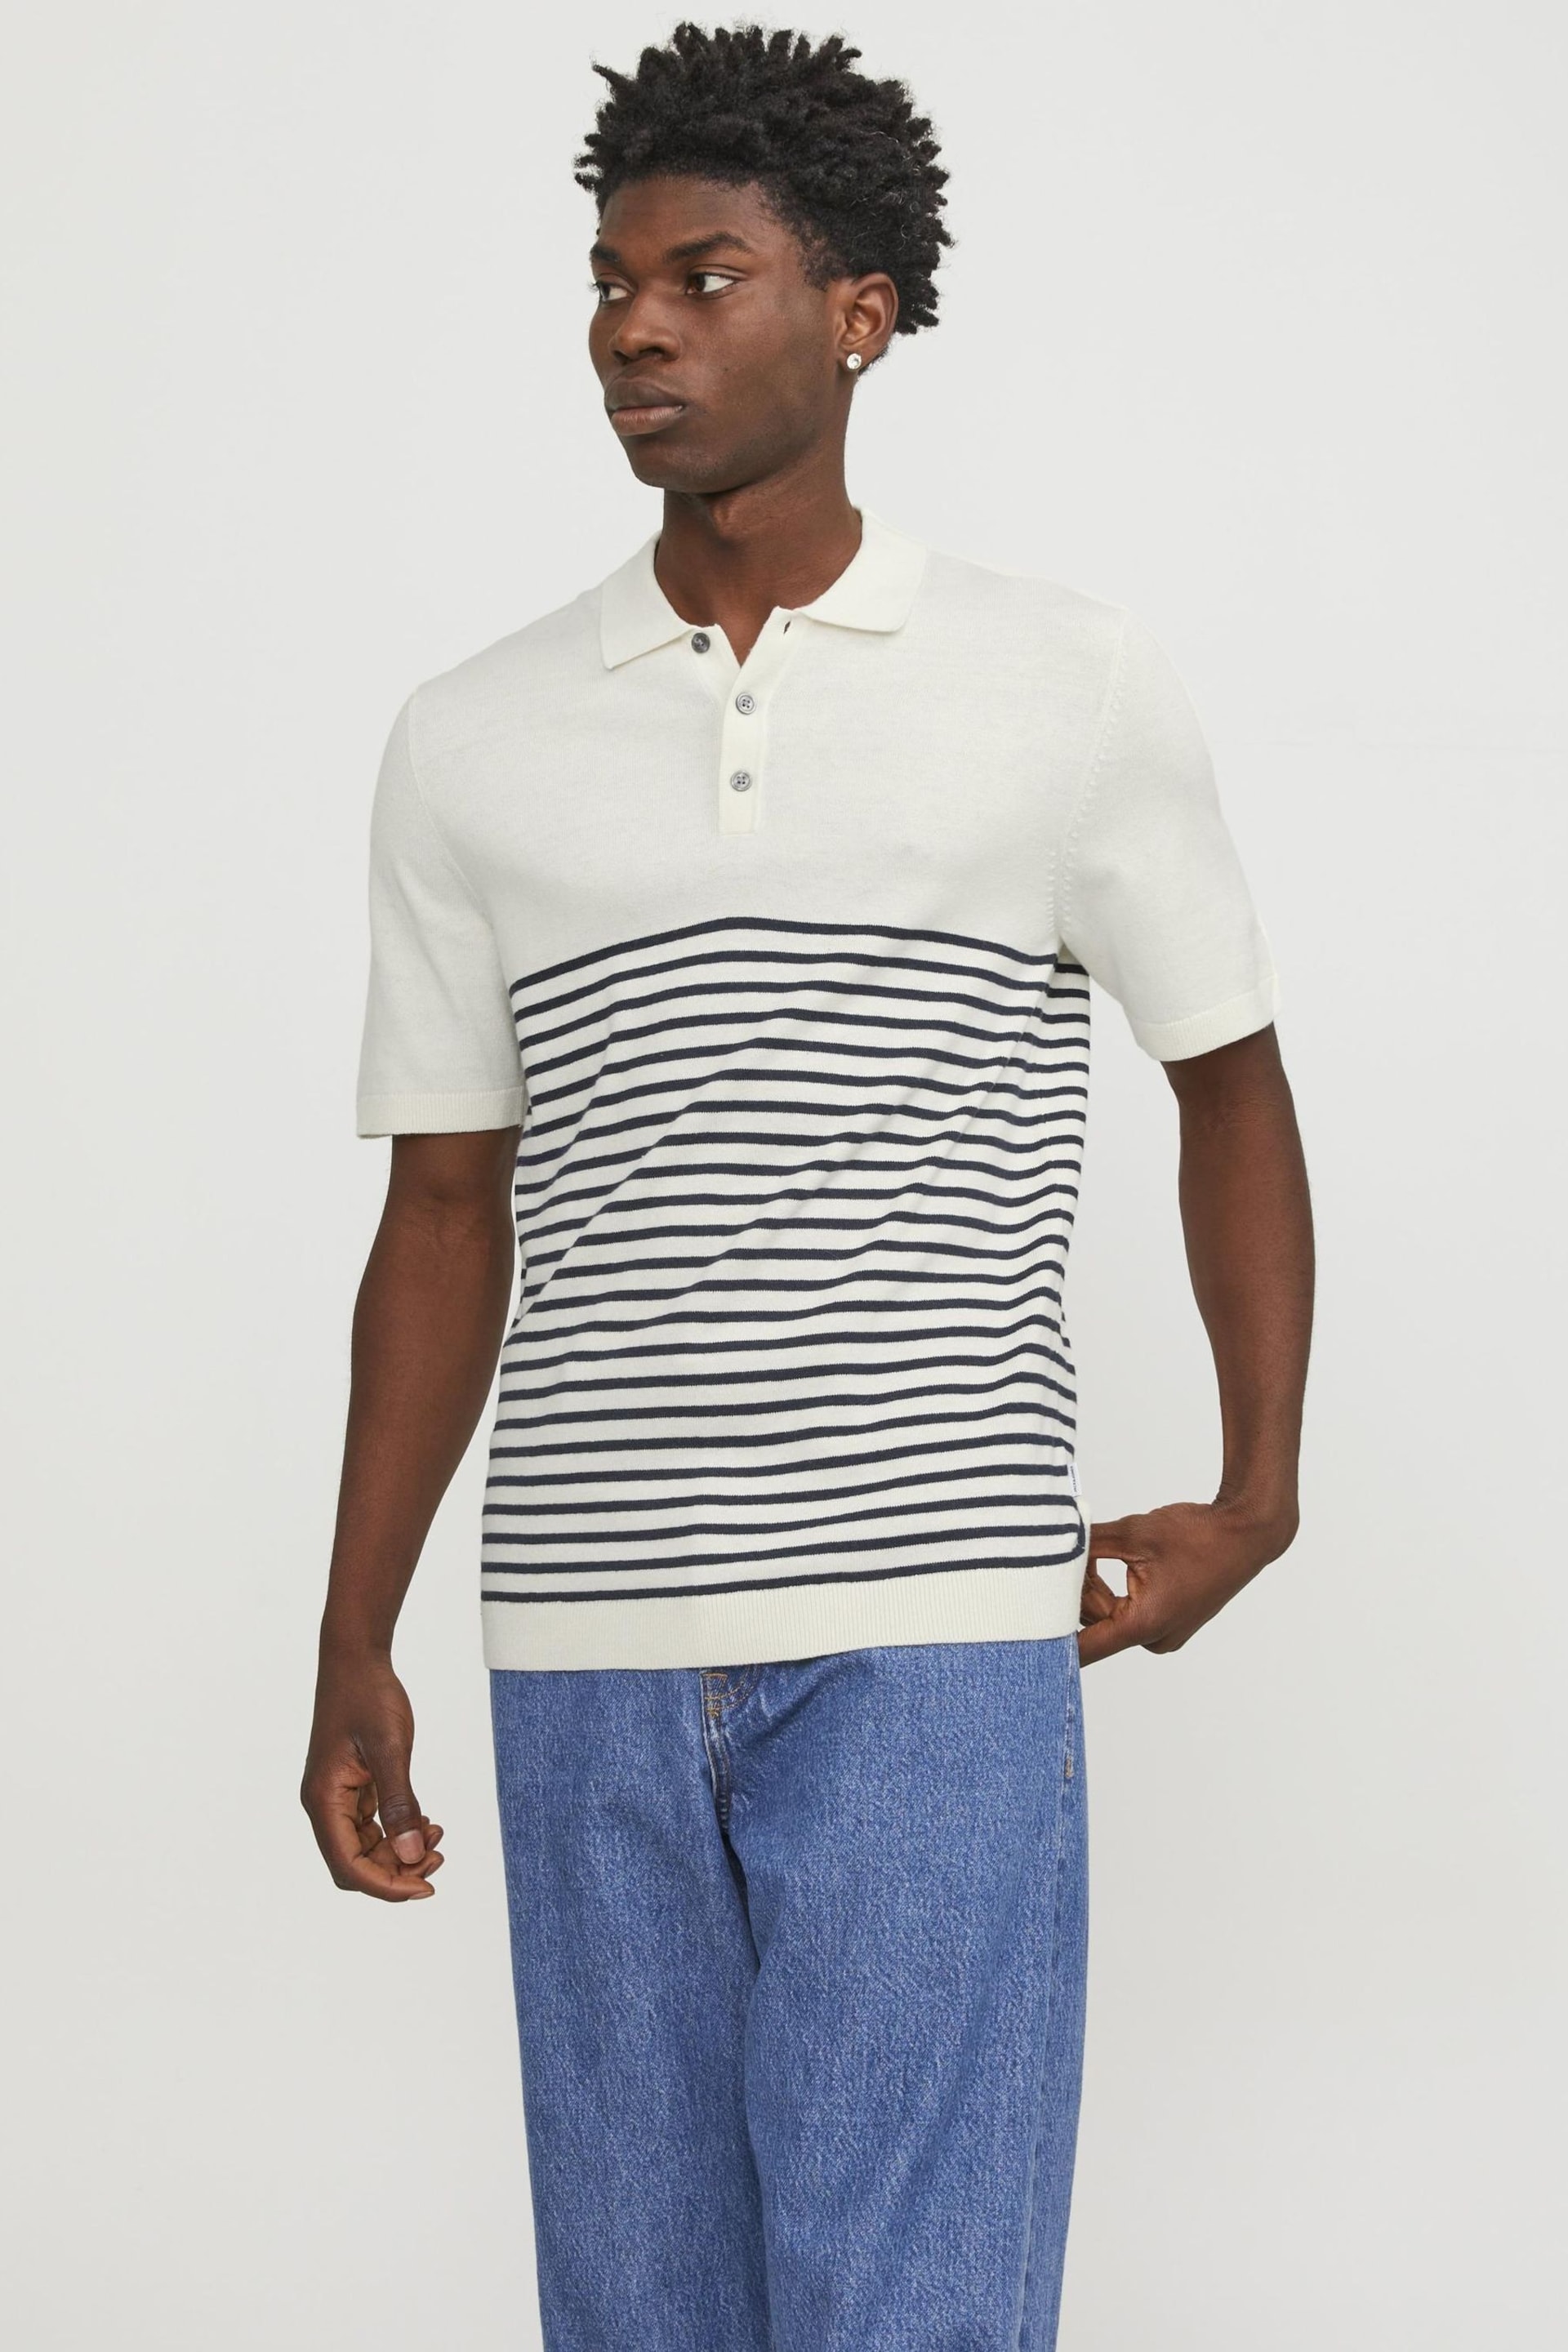 JACK & JONES White Knitted Polo Top - Image 1 of 6